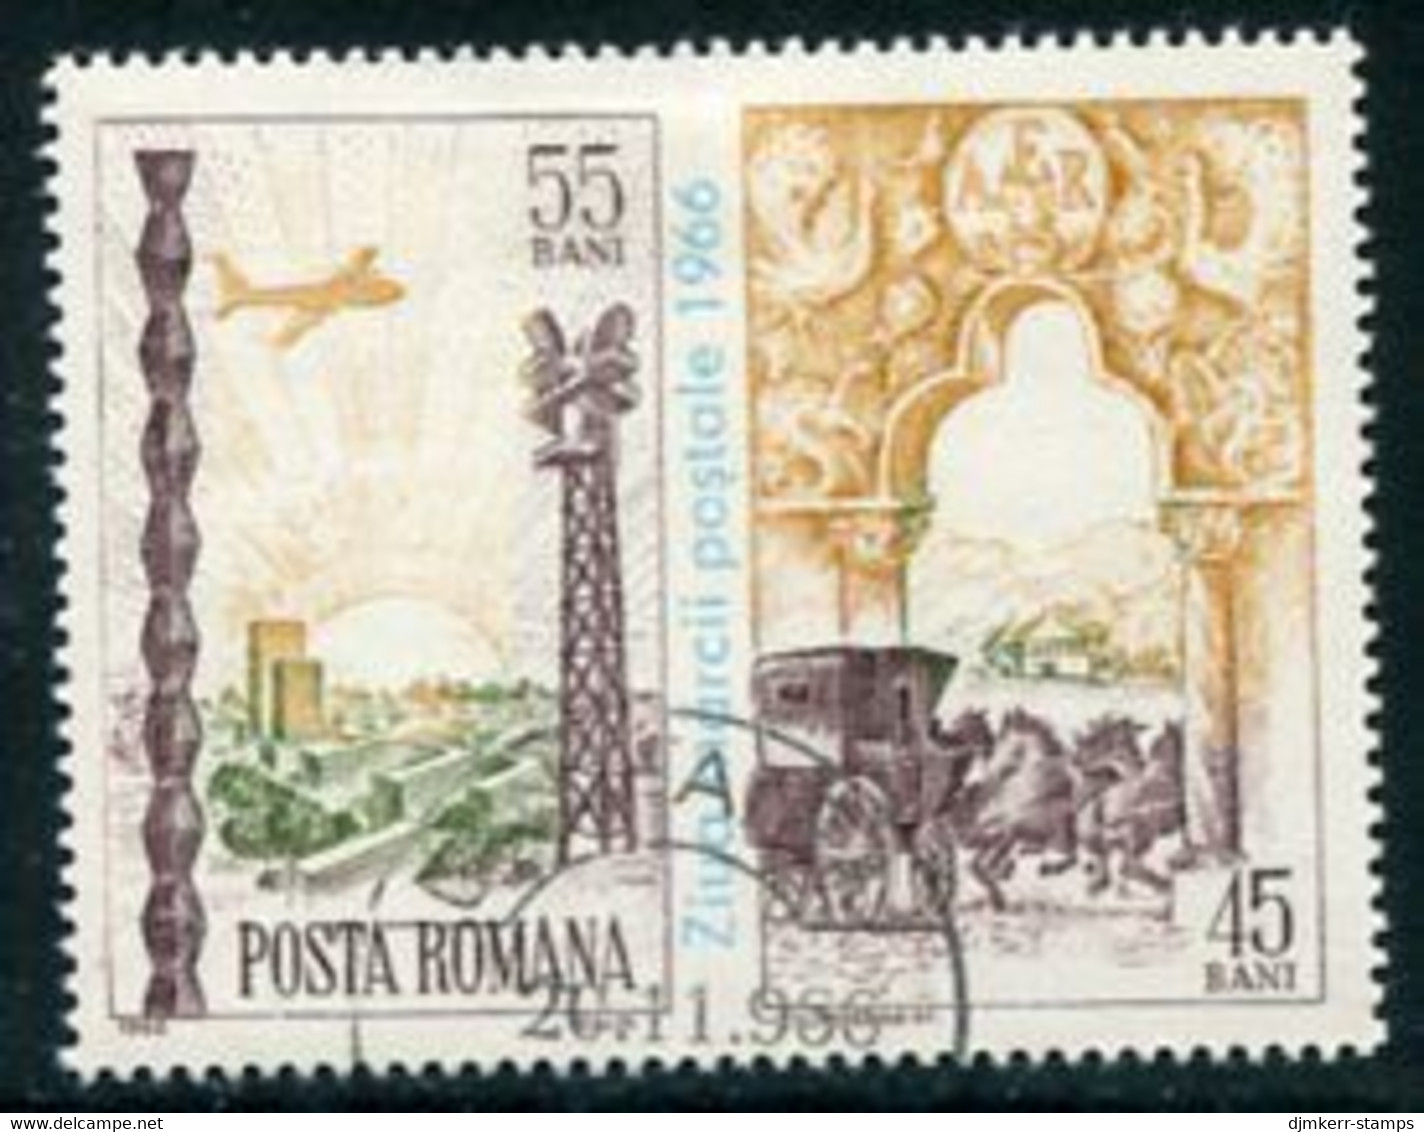 ROMANIA 1966 Stamp Day Used.  Michel 2552 - Used Stamps